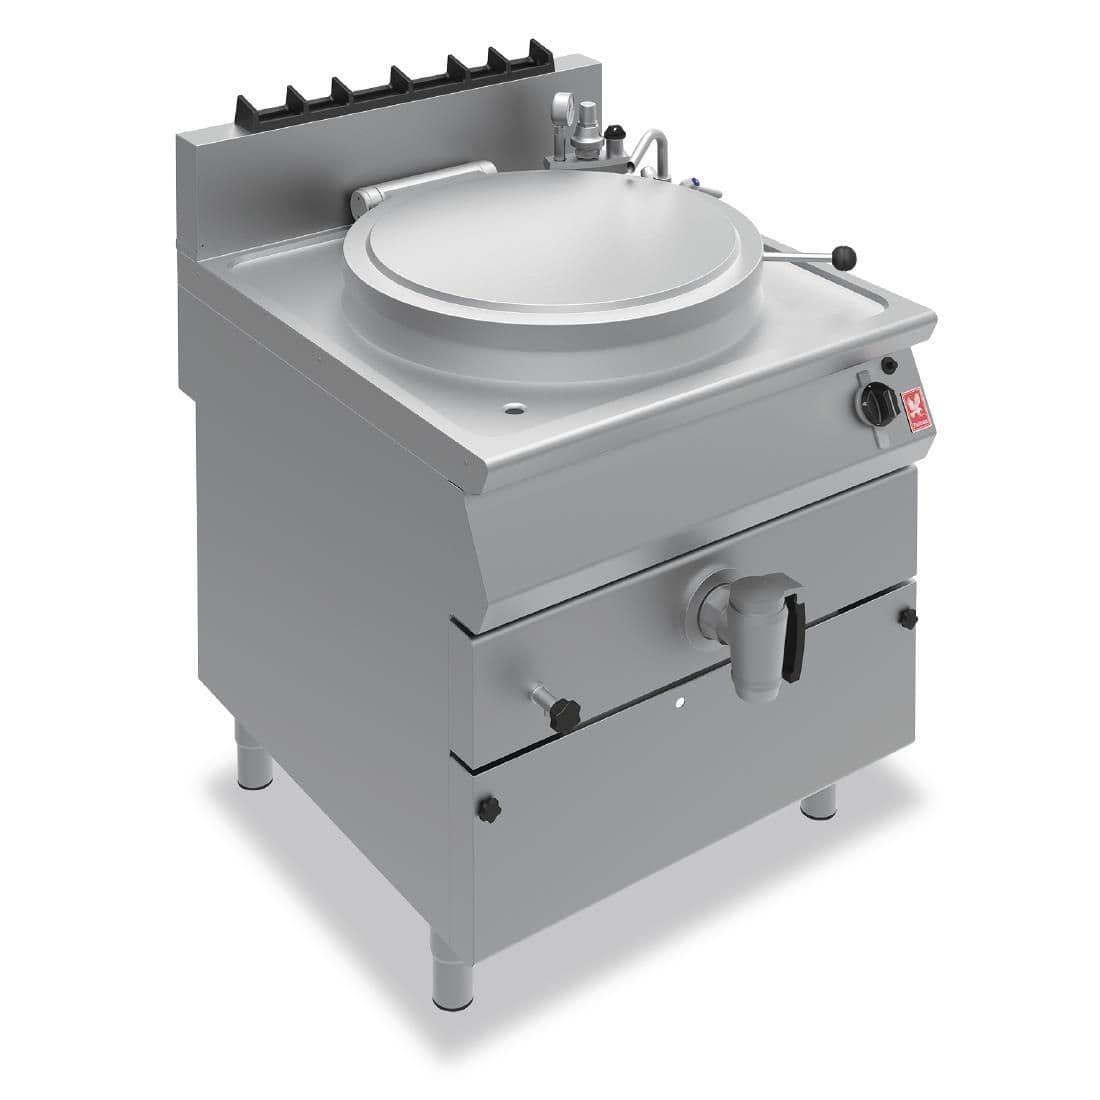 Falcon F900 Boiling Pan Natural Gas G9781 JD Catering Equipment Solutions Ltd